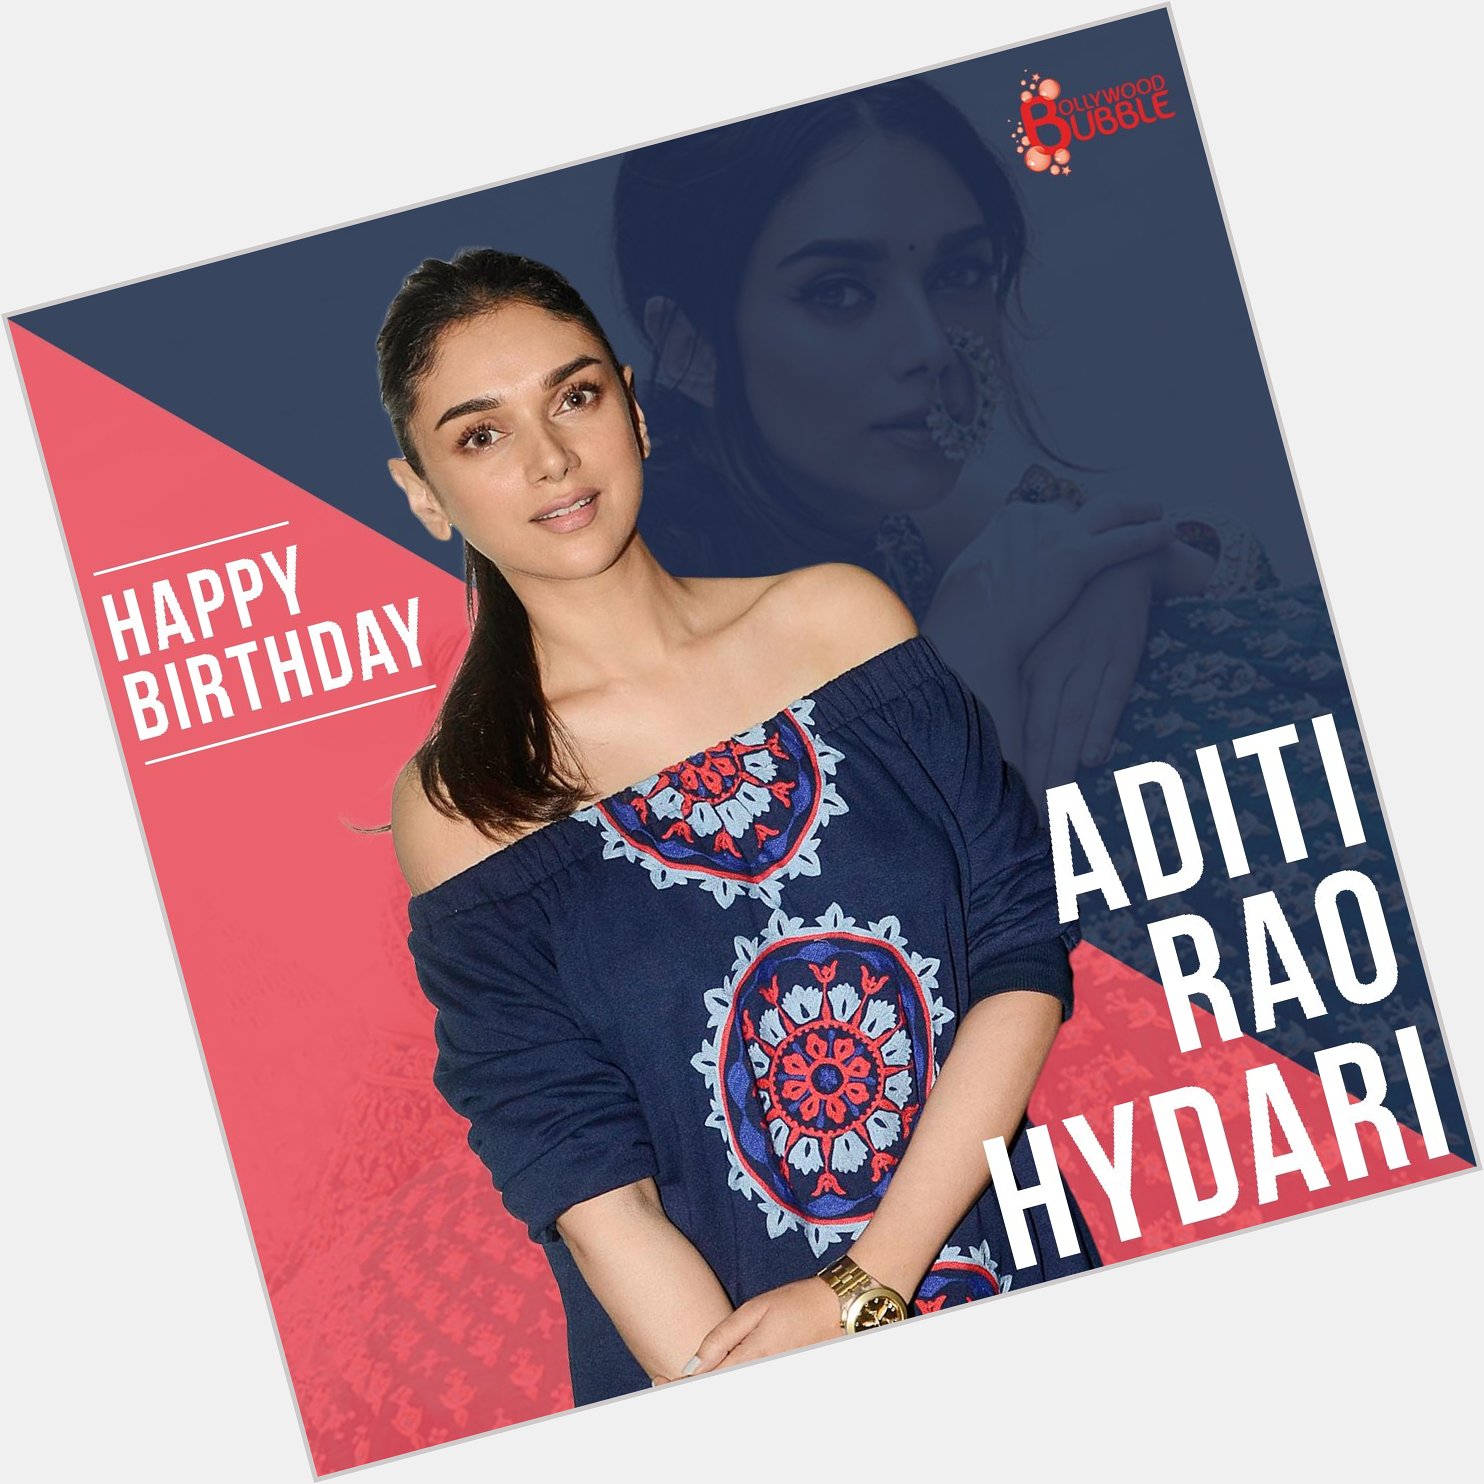 Sizzling and gorgeous, she is talent aplomb. wishes Aditi Rao Hydari a very Happy Birthday! 